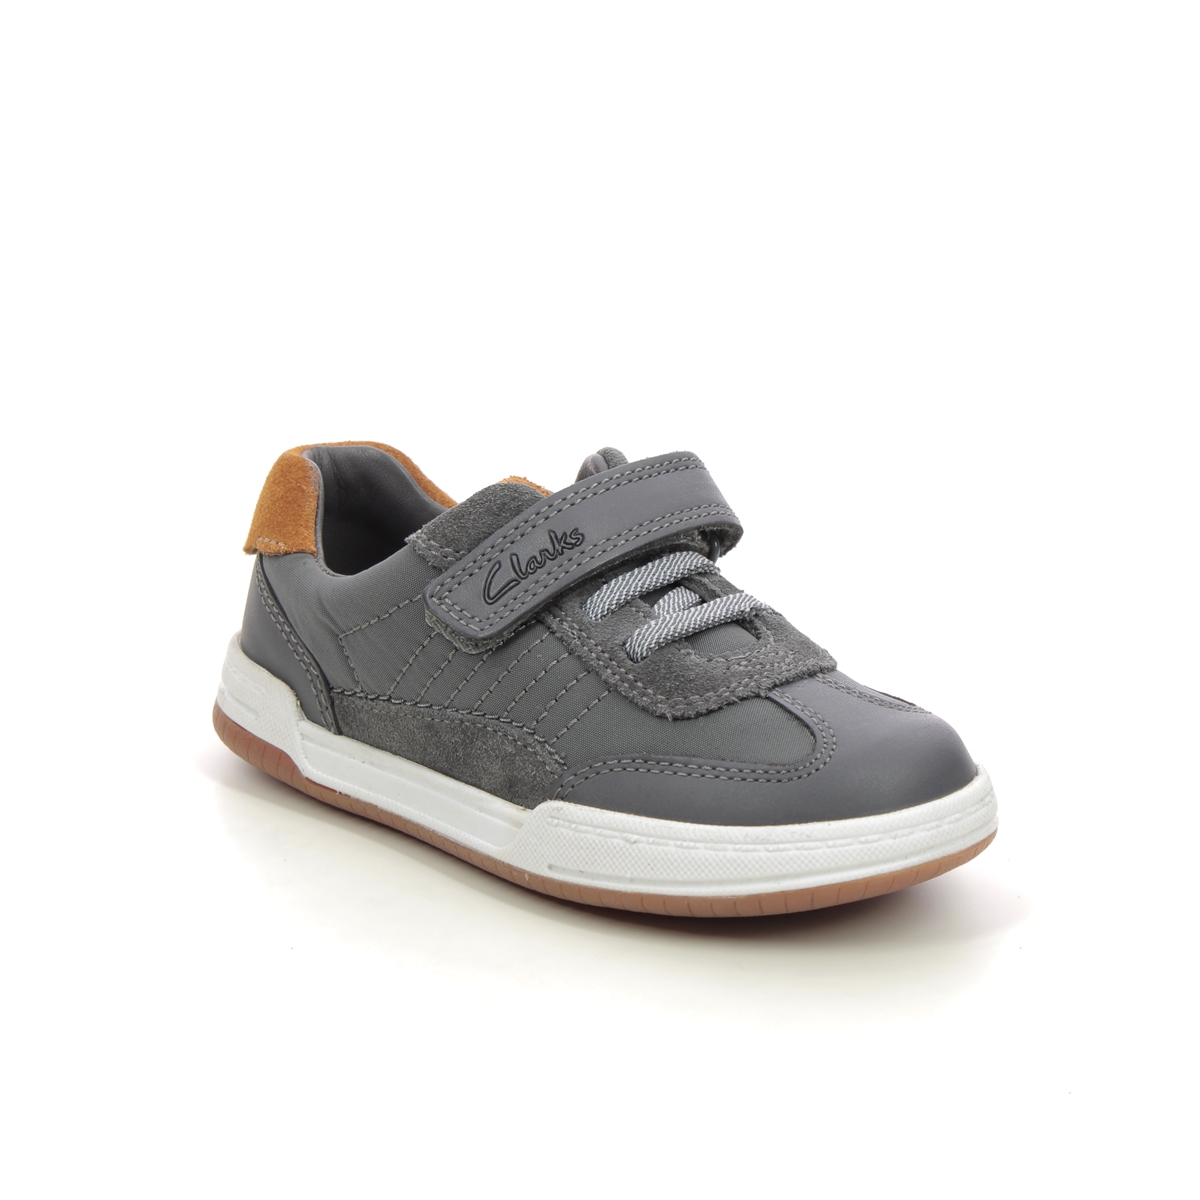 Clarks Fawn Family K Grey Leather Kids Boys Toddler Shoes 751156F In Size 7.5 In Plain Grey Leather F Width Fitting Regular Fit For kids